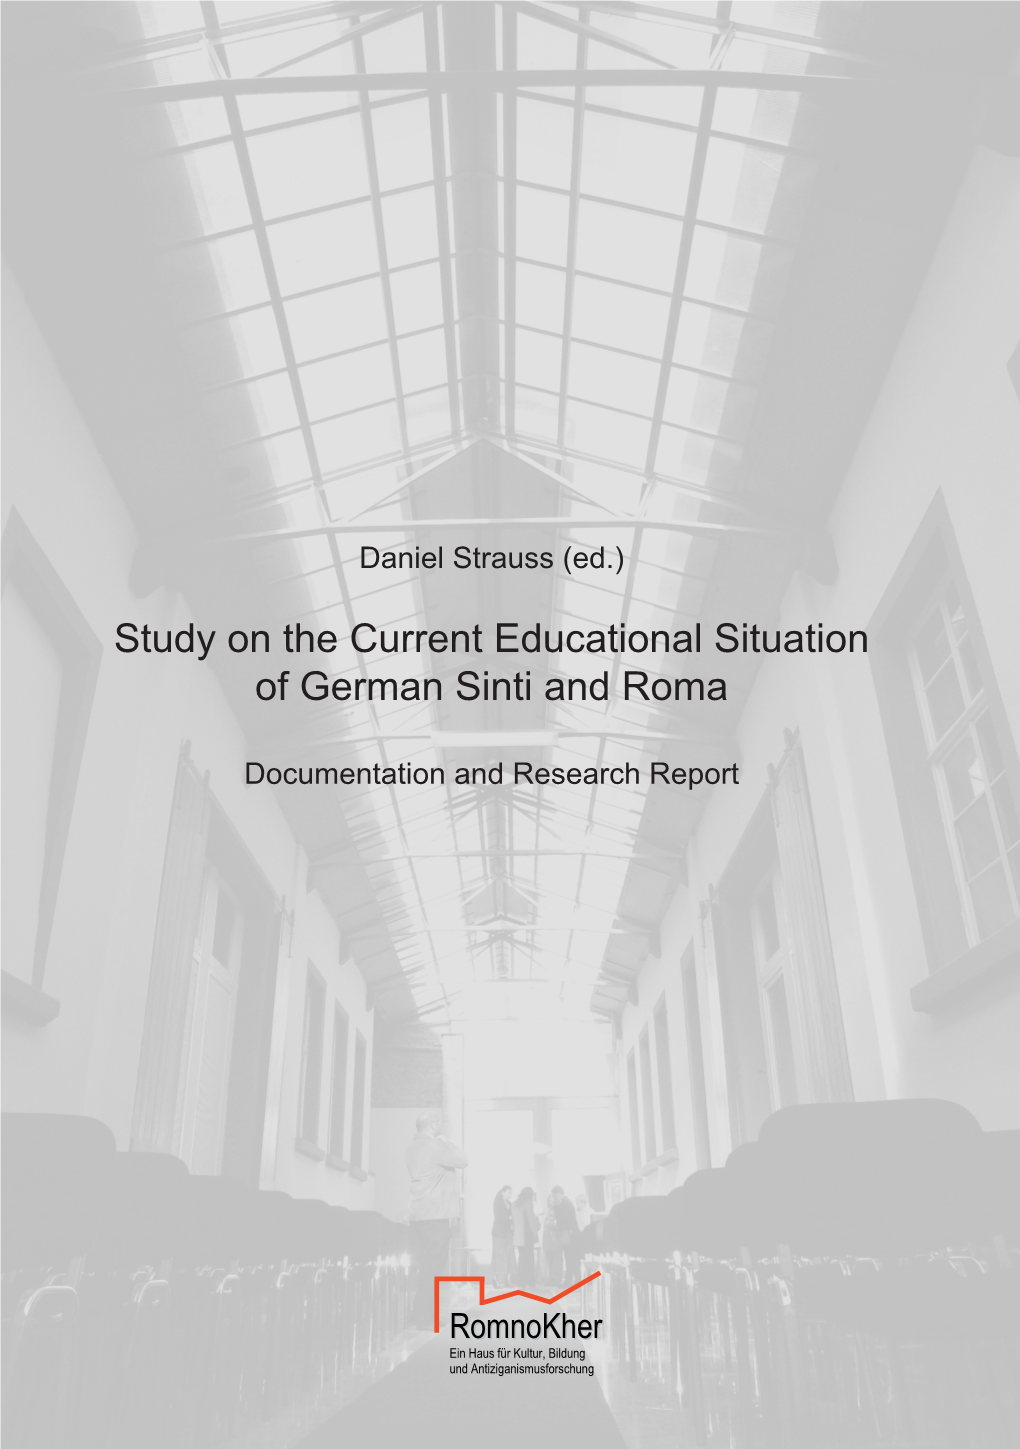 Study on the Current Educational Situation of German Sinti and Roma